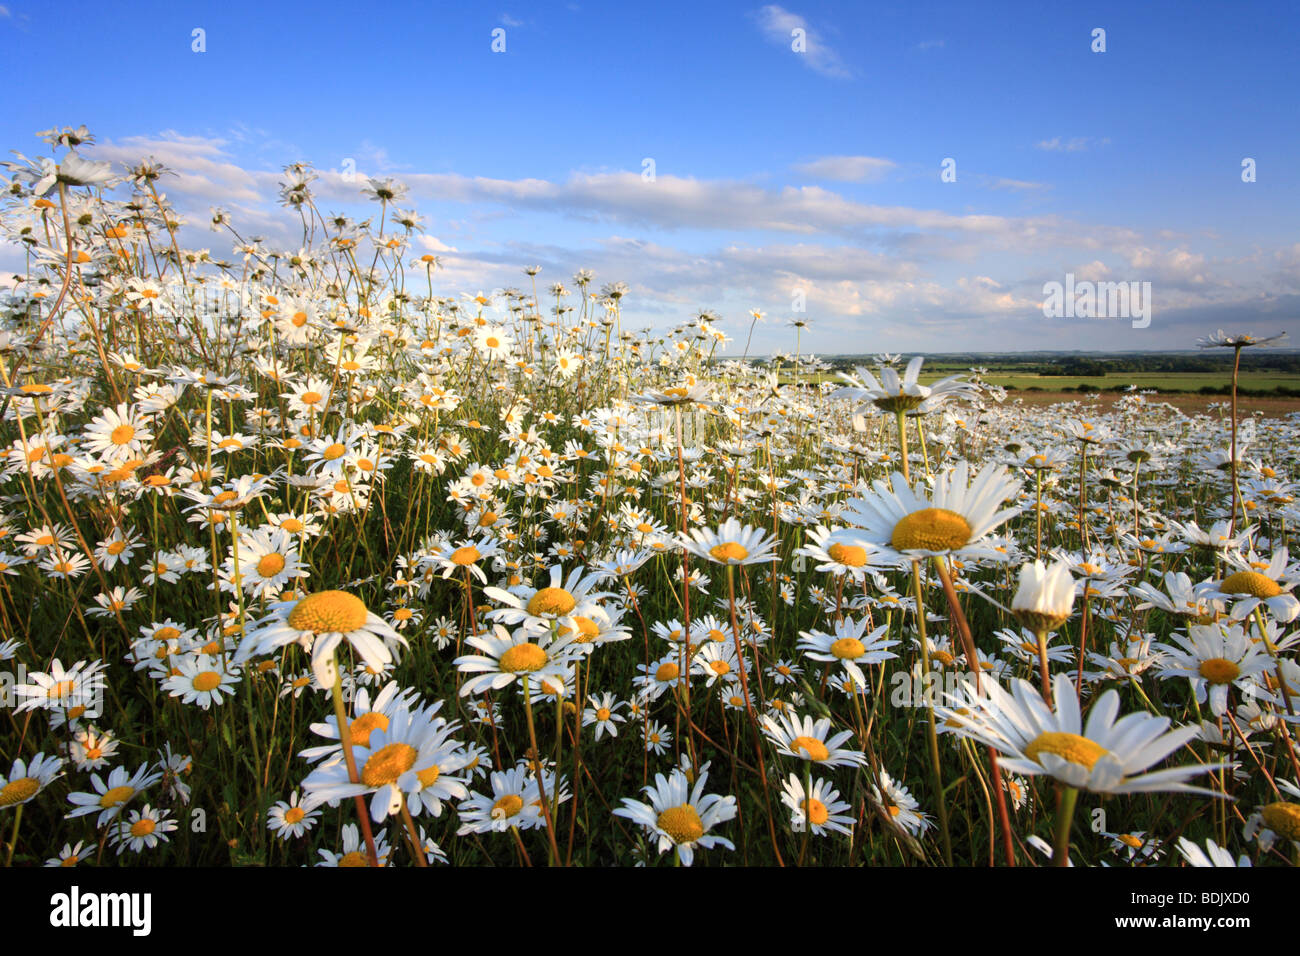 Close up of a field full of 'Common Daisies' yellow white flowers Stock Photo